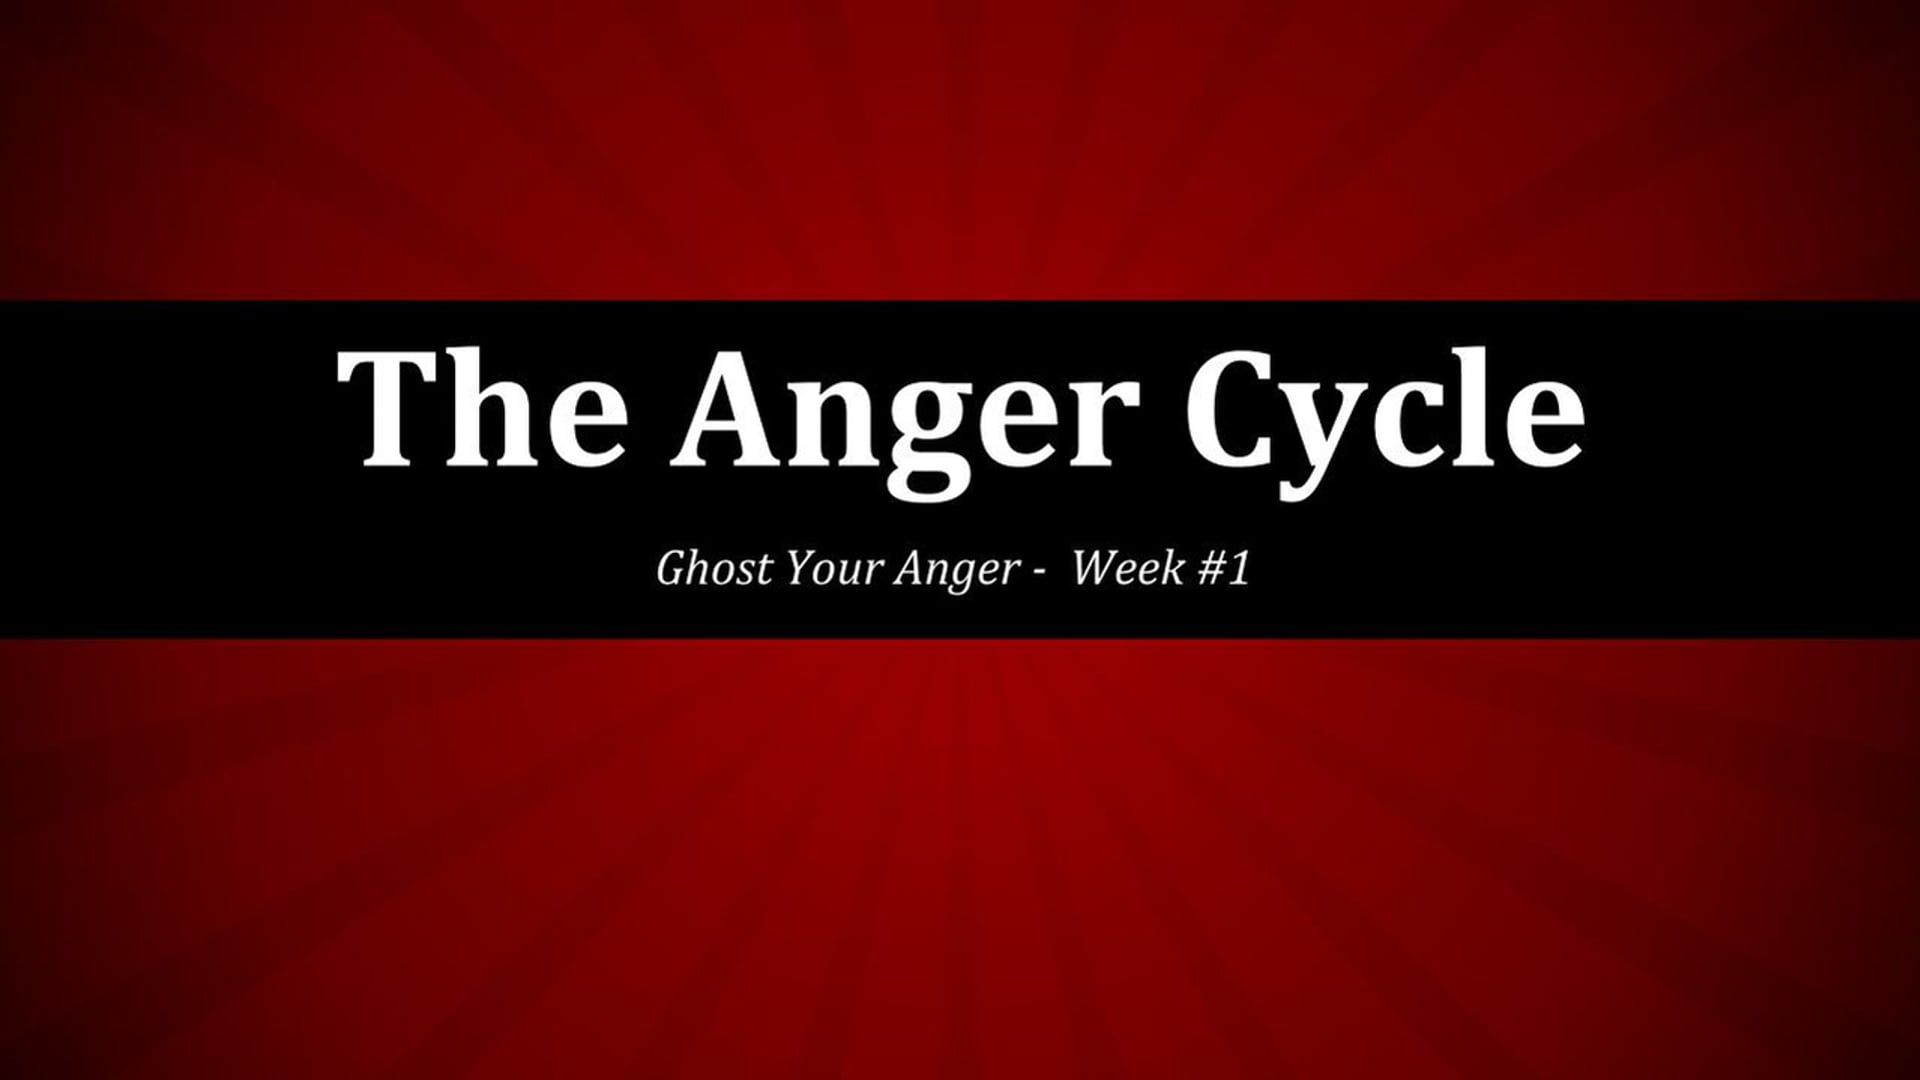 The Anger Cycle